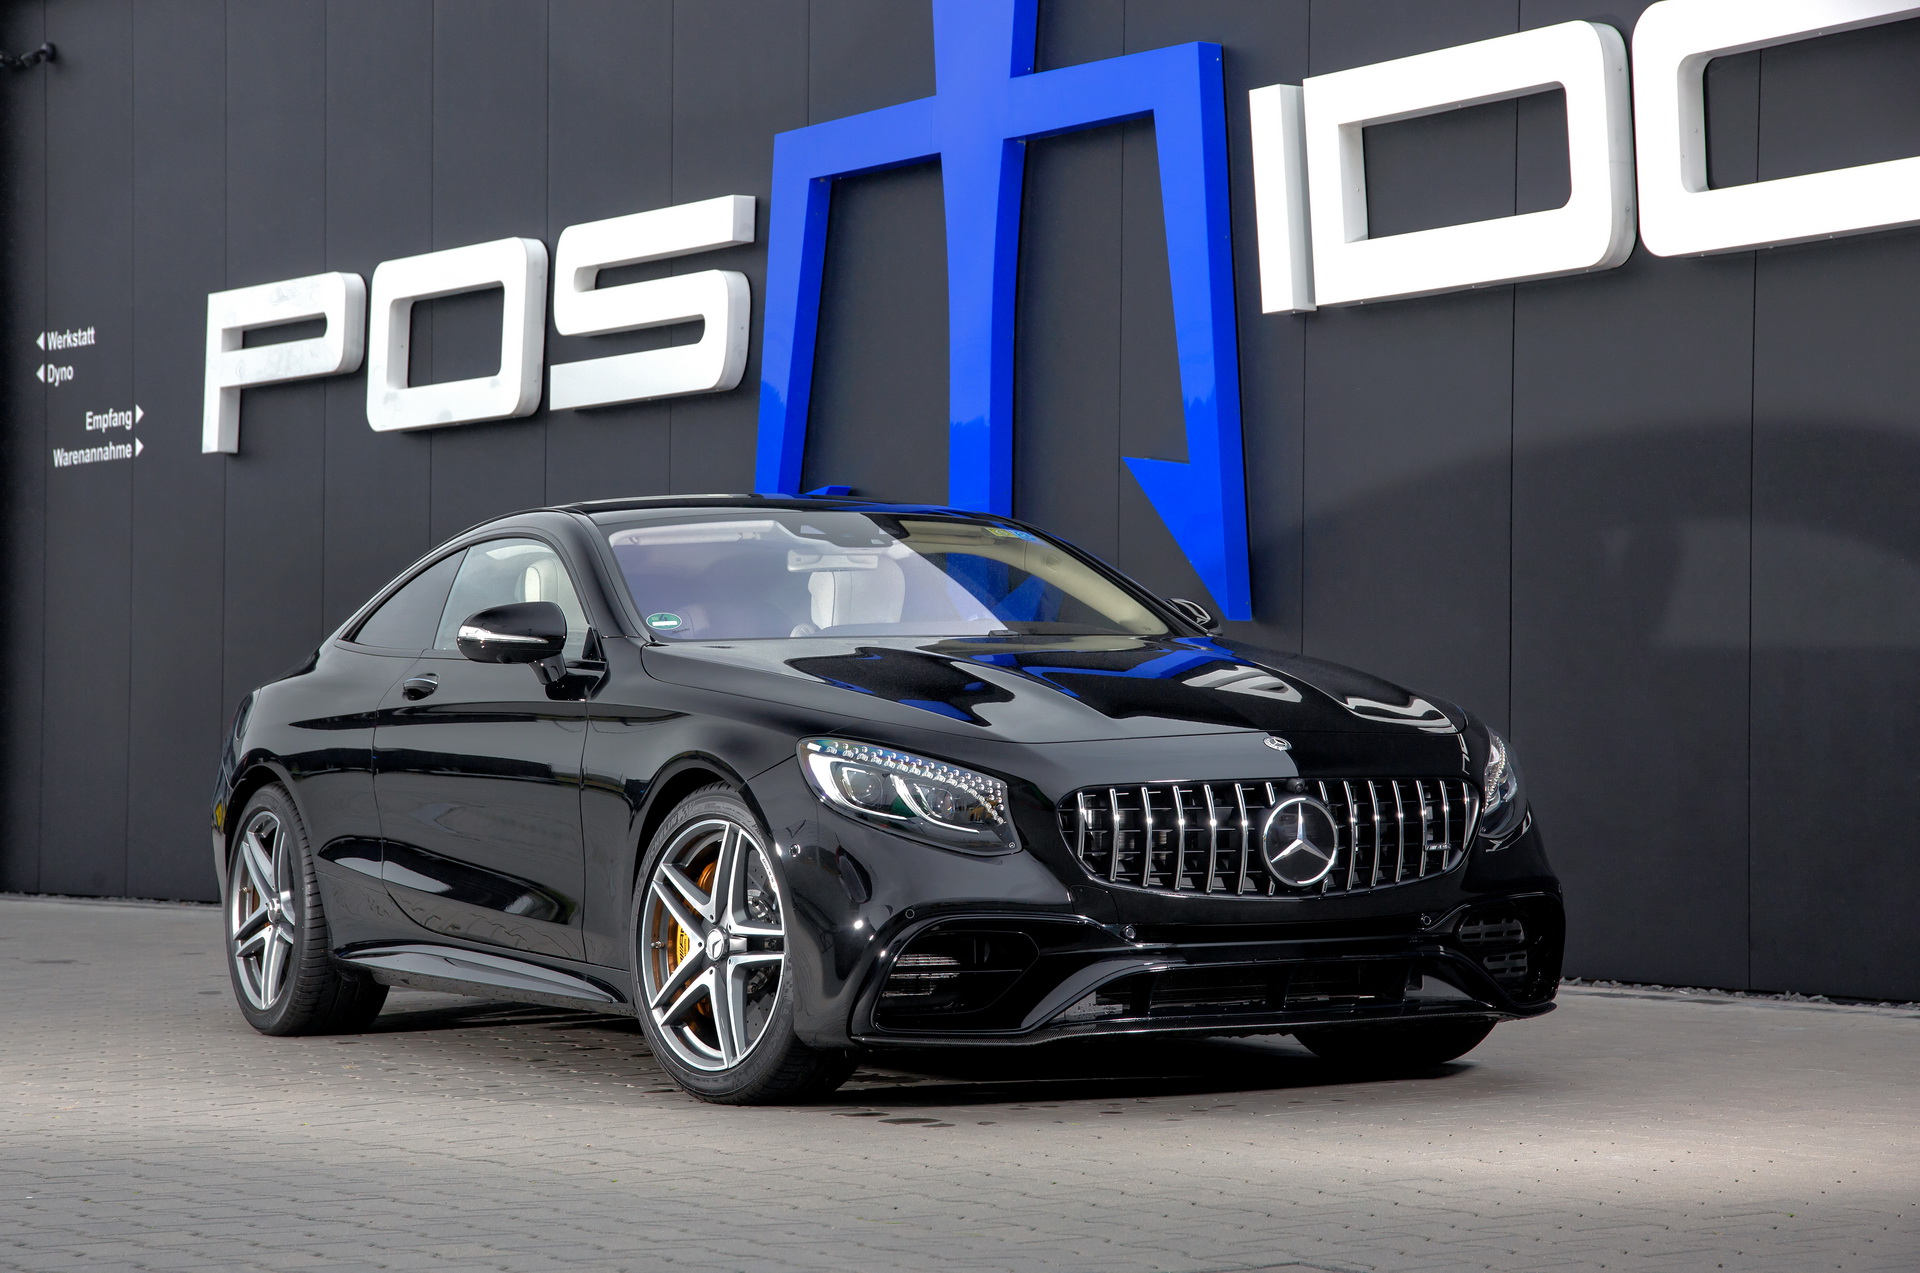 2021 Mercedes Amg S63 Coupe Gets 927 Hp From Posaidon